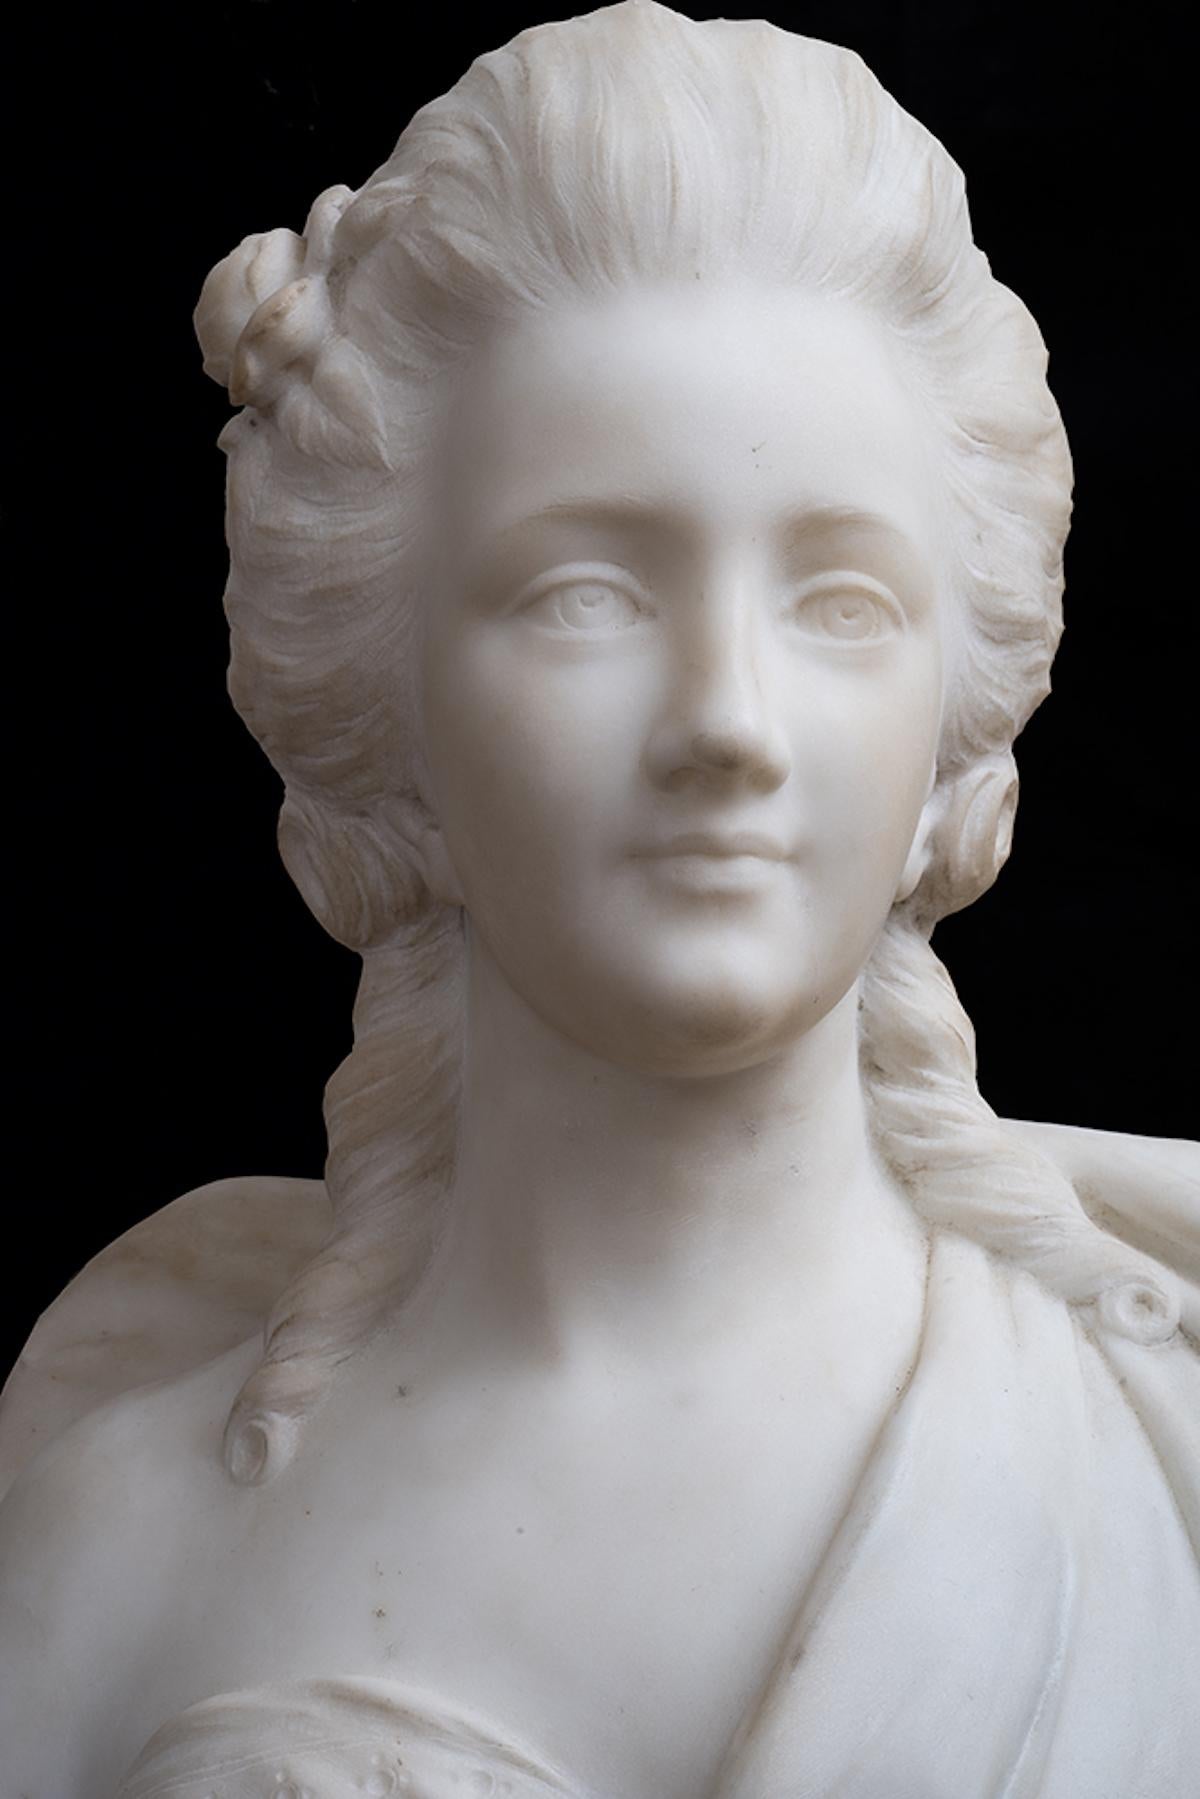 Antique white marble statuary sculpture depicting Marie Antoinette. - Sculpture by Unknown